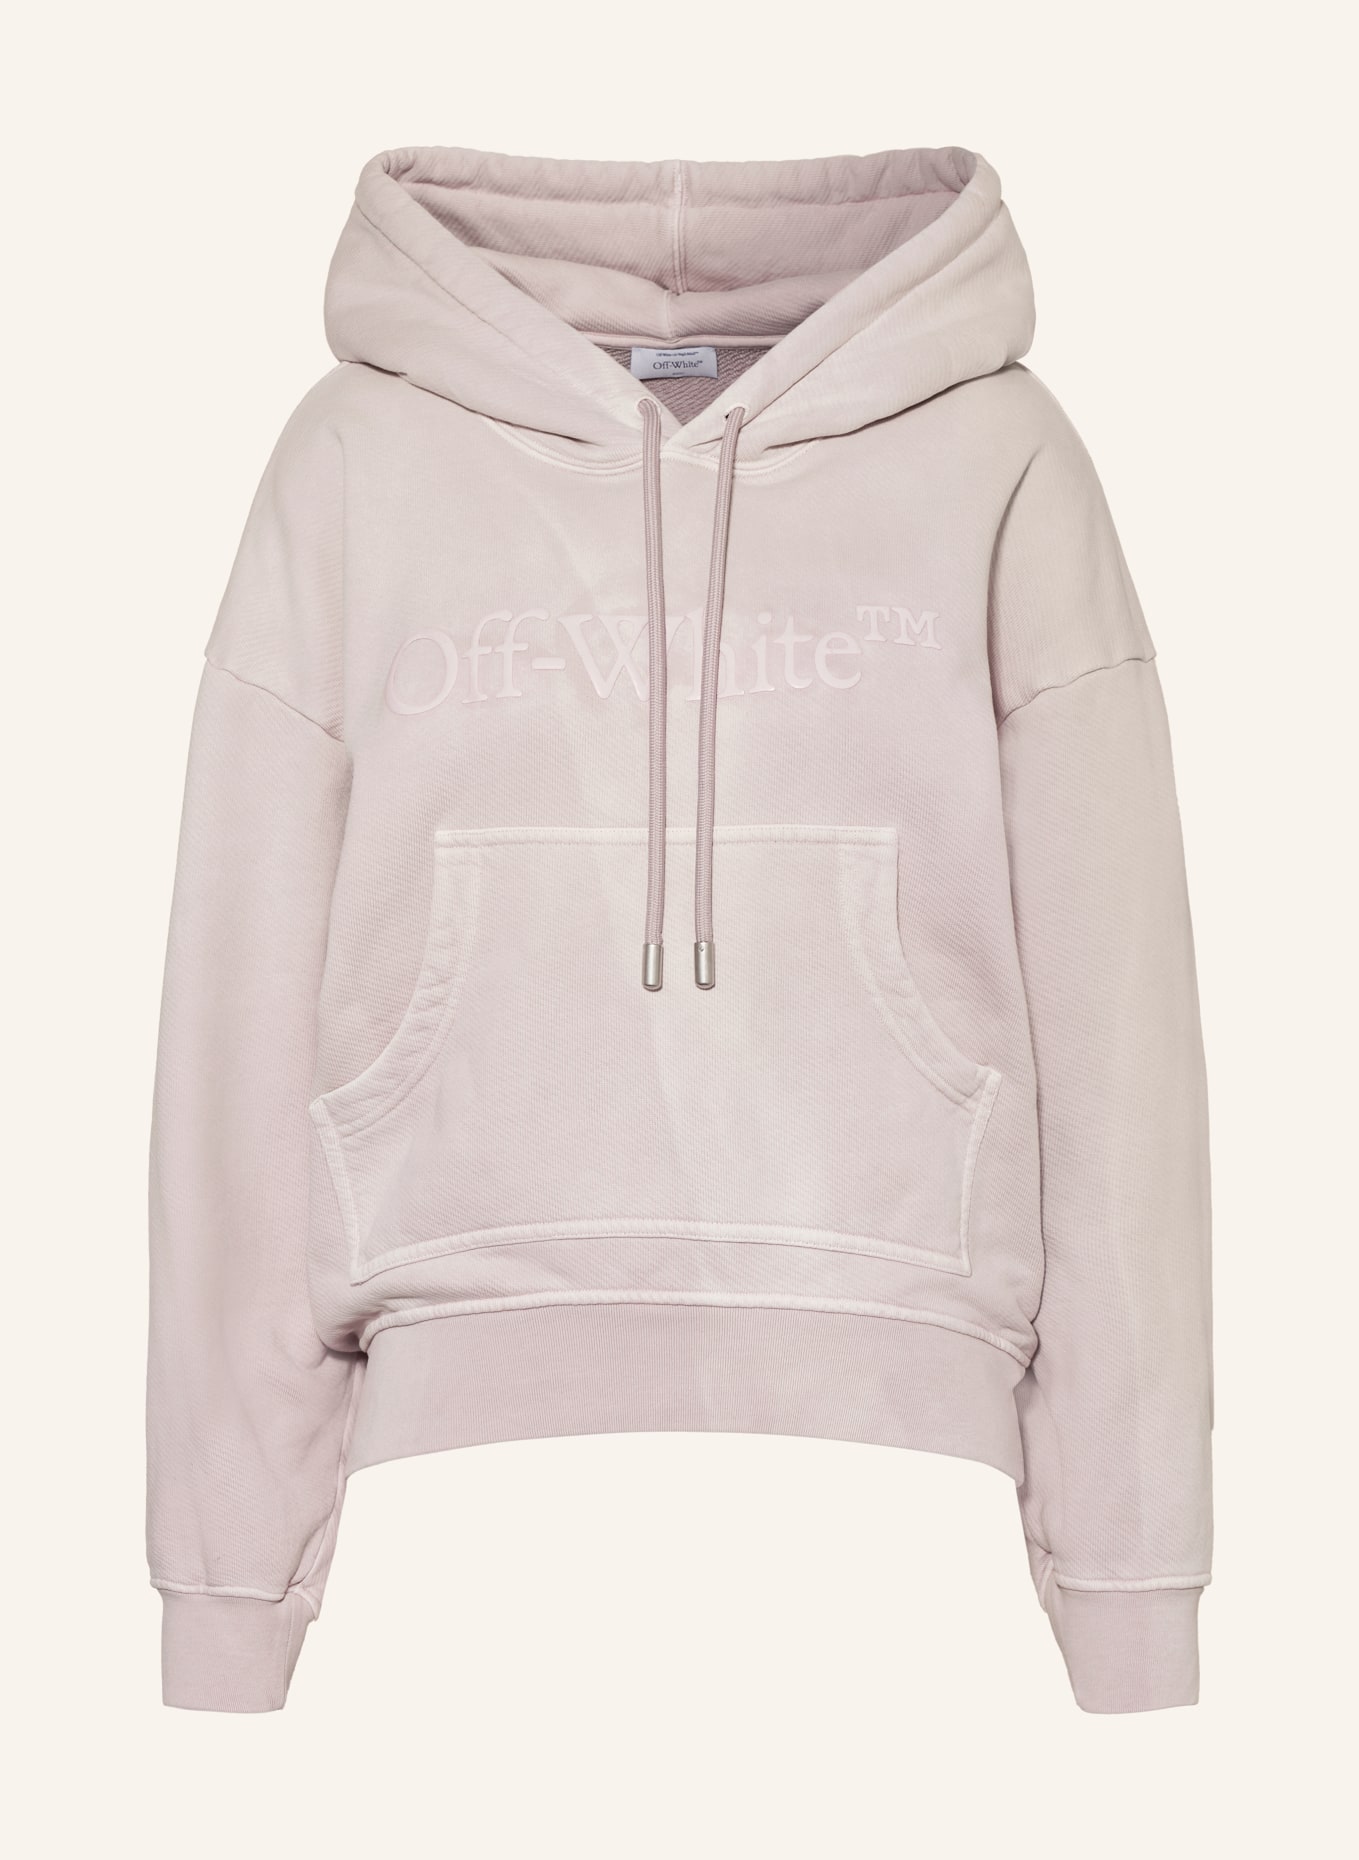 Off-White Oversized-Hoodie LAUNDRY, Farbe: ROSÉ (Bild 1)